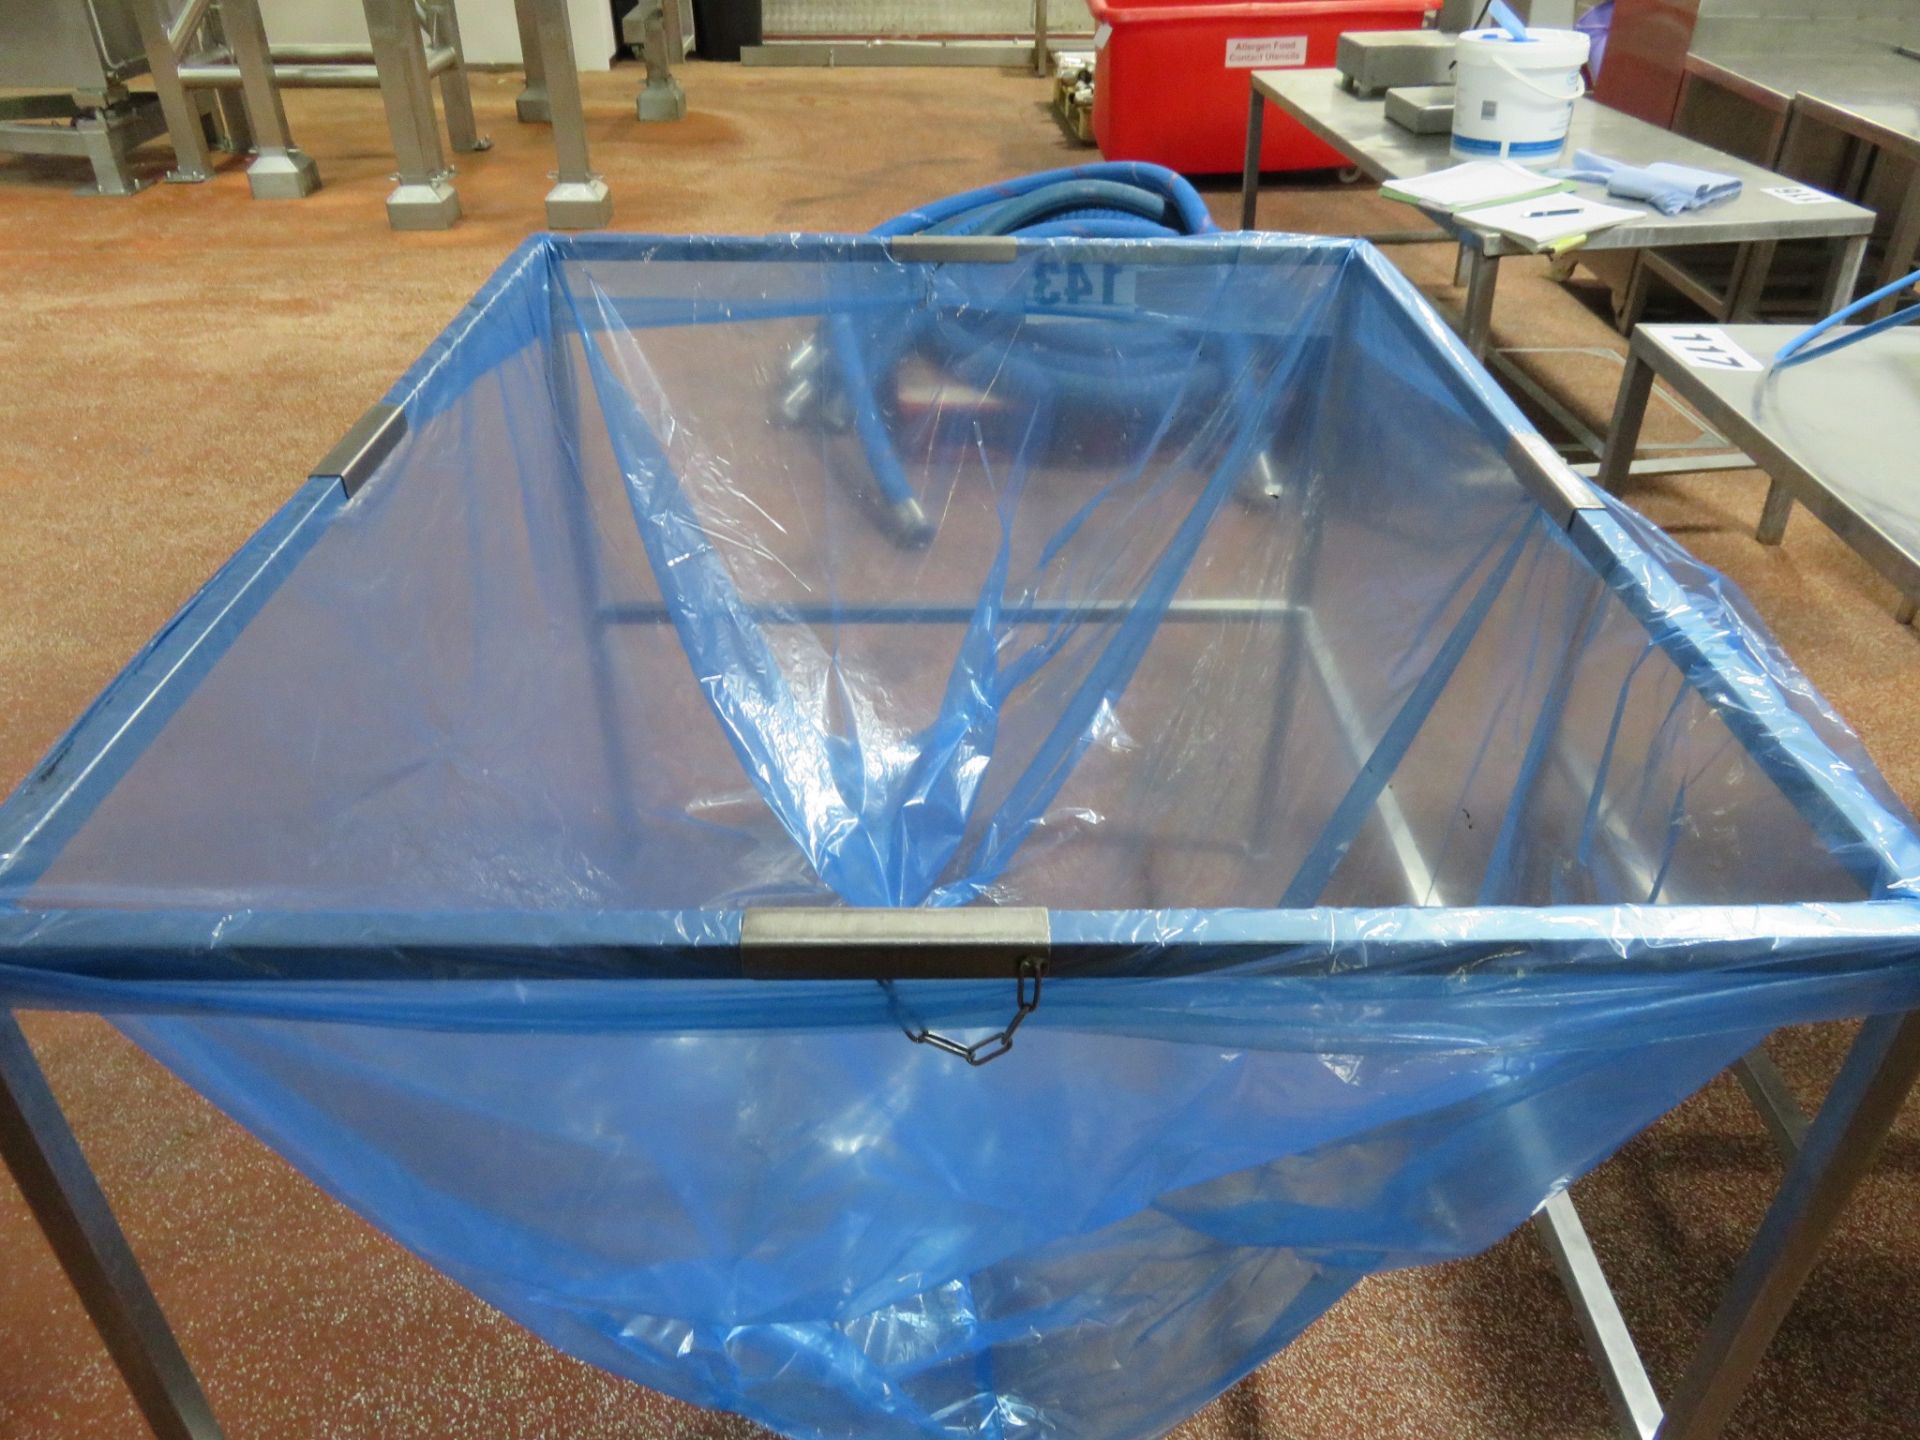 S/s bin liner Holders 1200mm x 1300mm x 960mm high. Lift Out £20 - Image 2 of 2